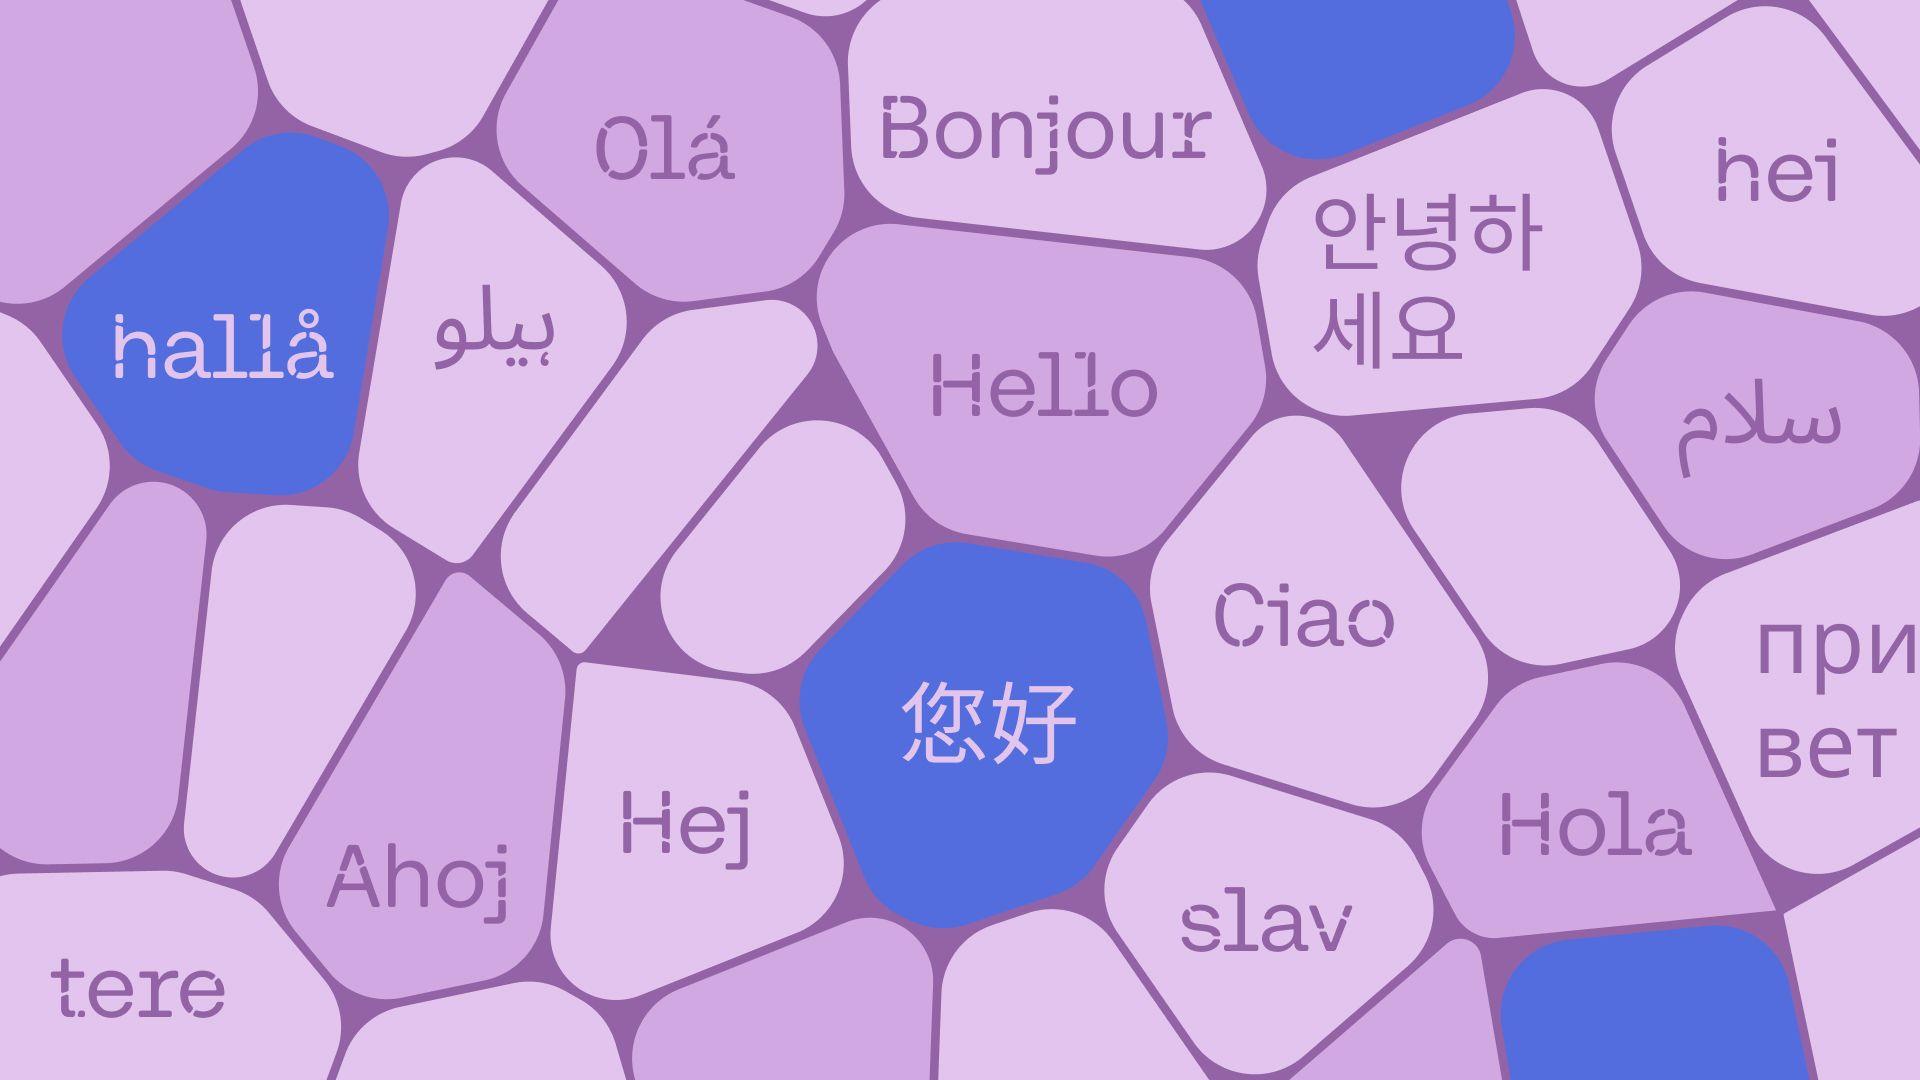 Bonjour. مرحبا. Guten tag. Hola. Cohere's Multilingual Text Understanding Model is Now Available